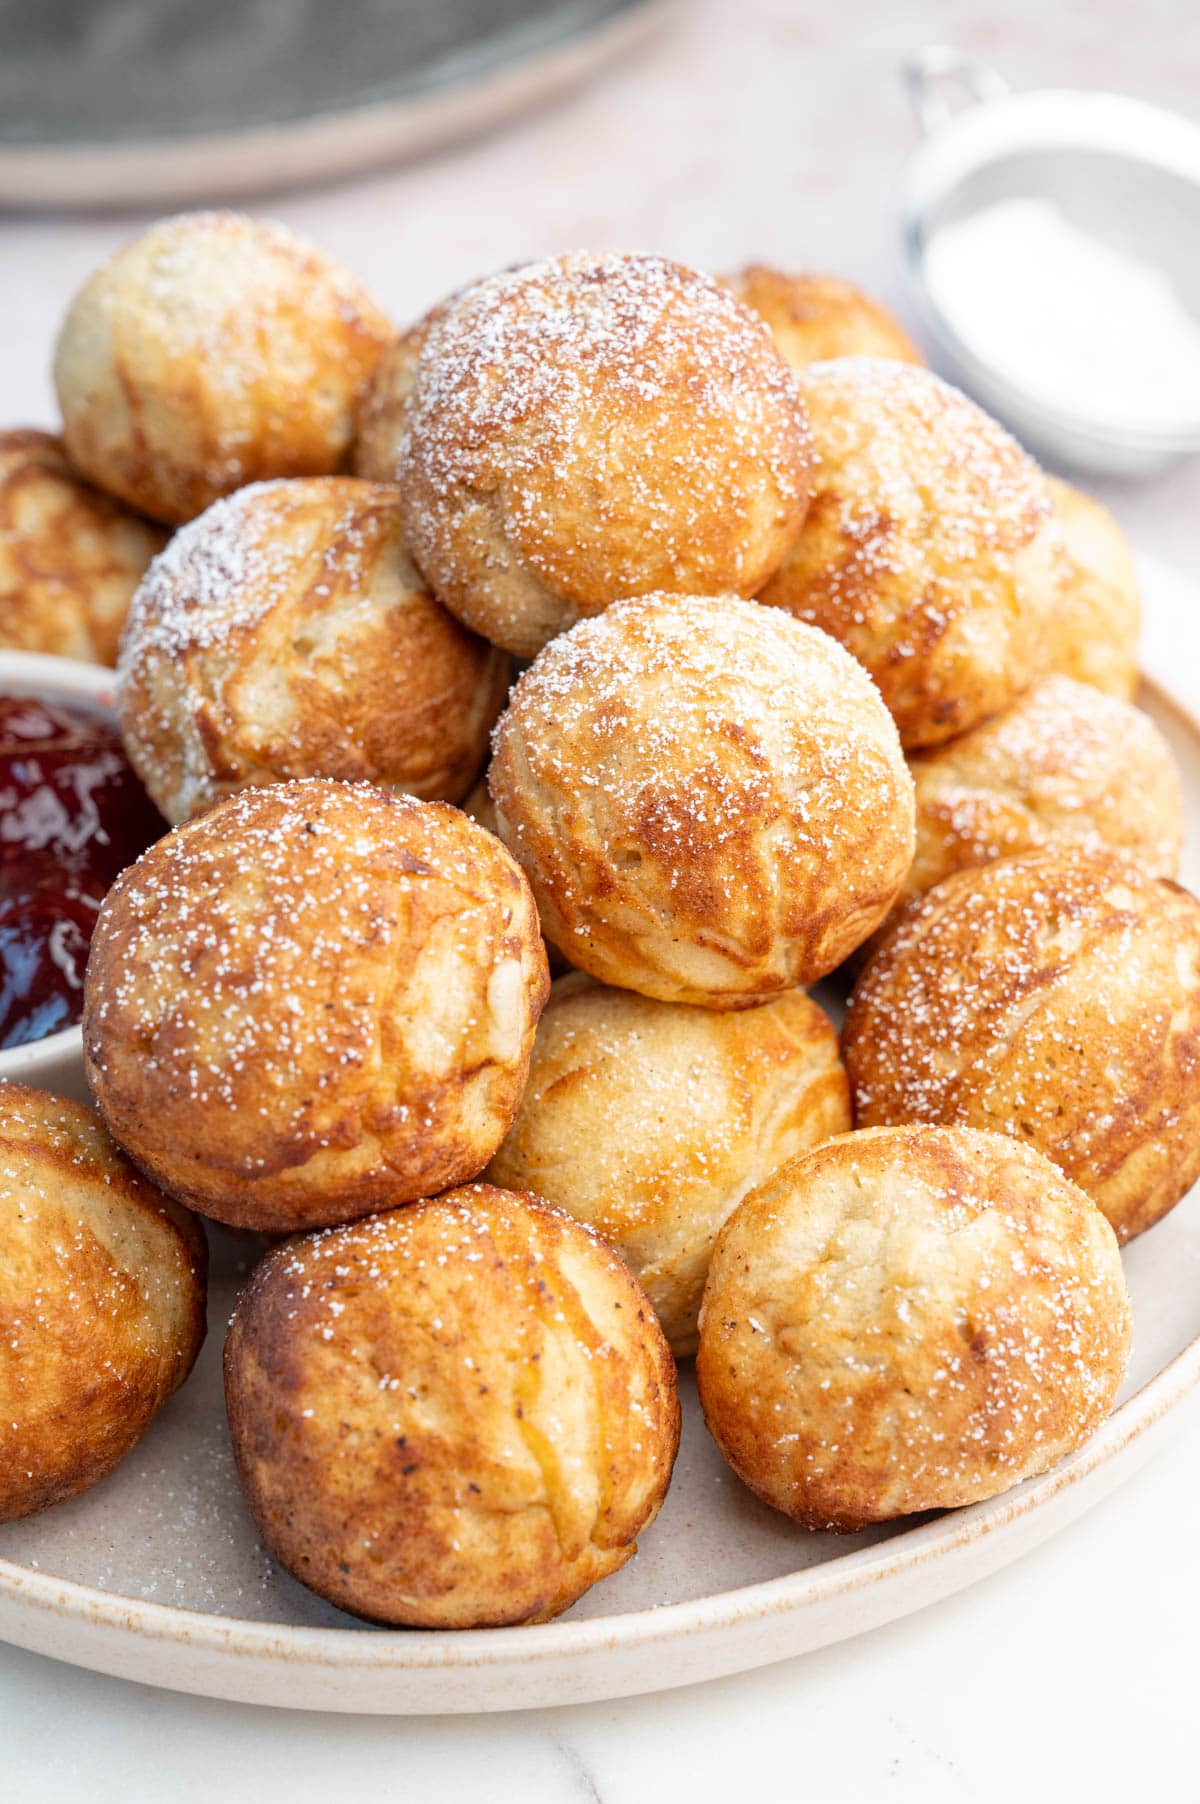 Aebleskiver - Danish Pancake Balls on a beige plate dusted with powdered sugar.